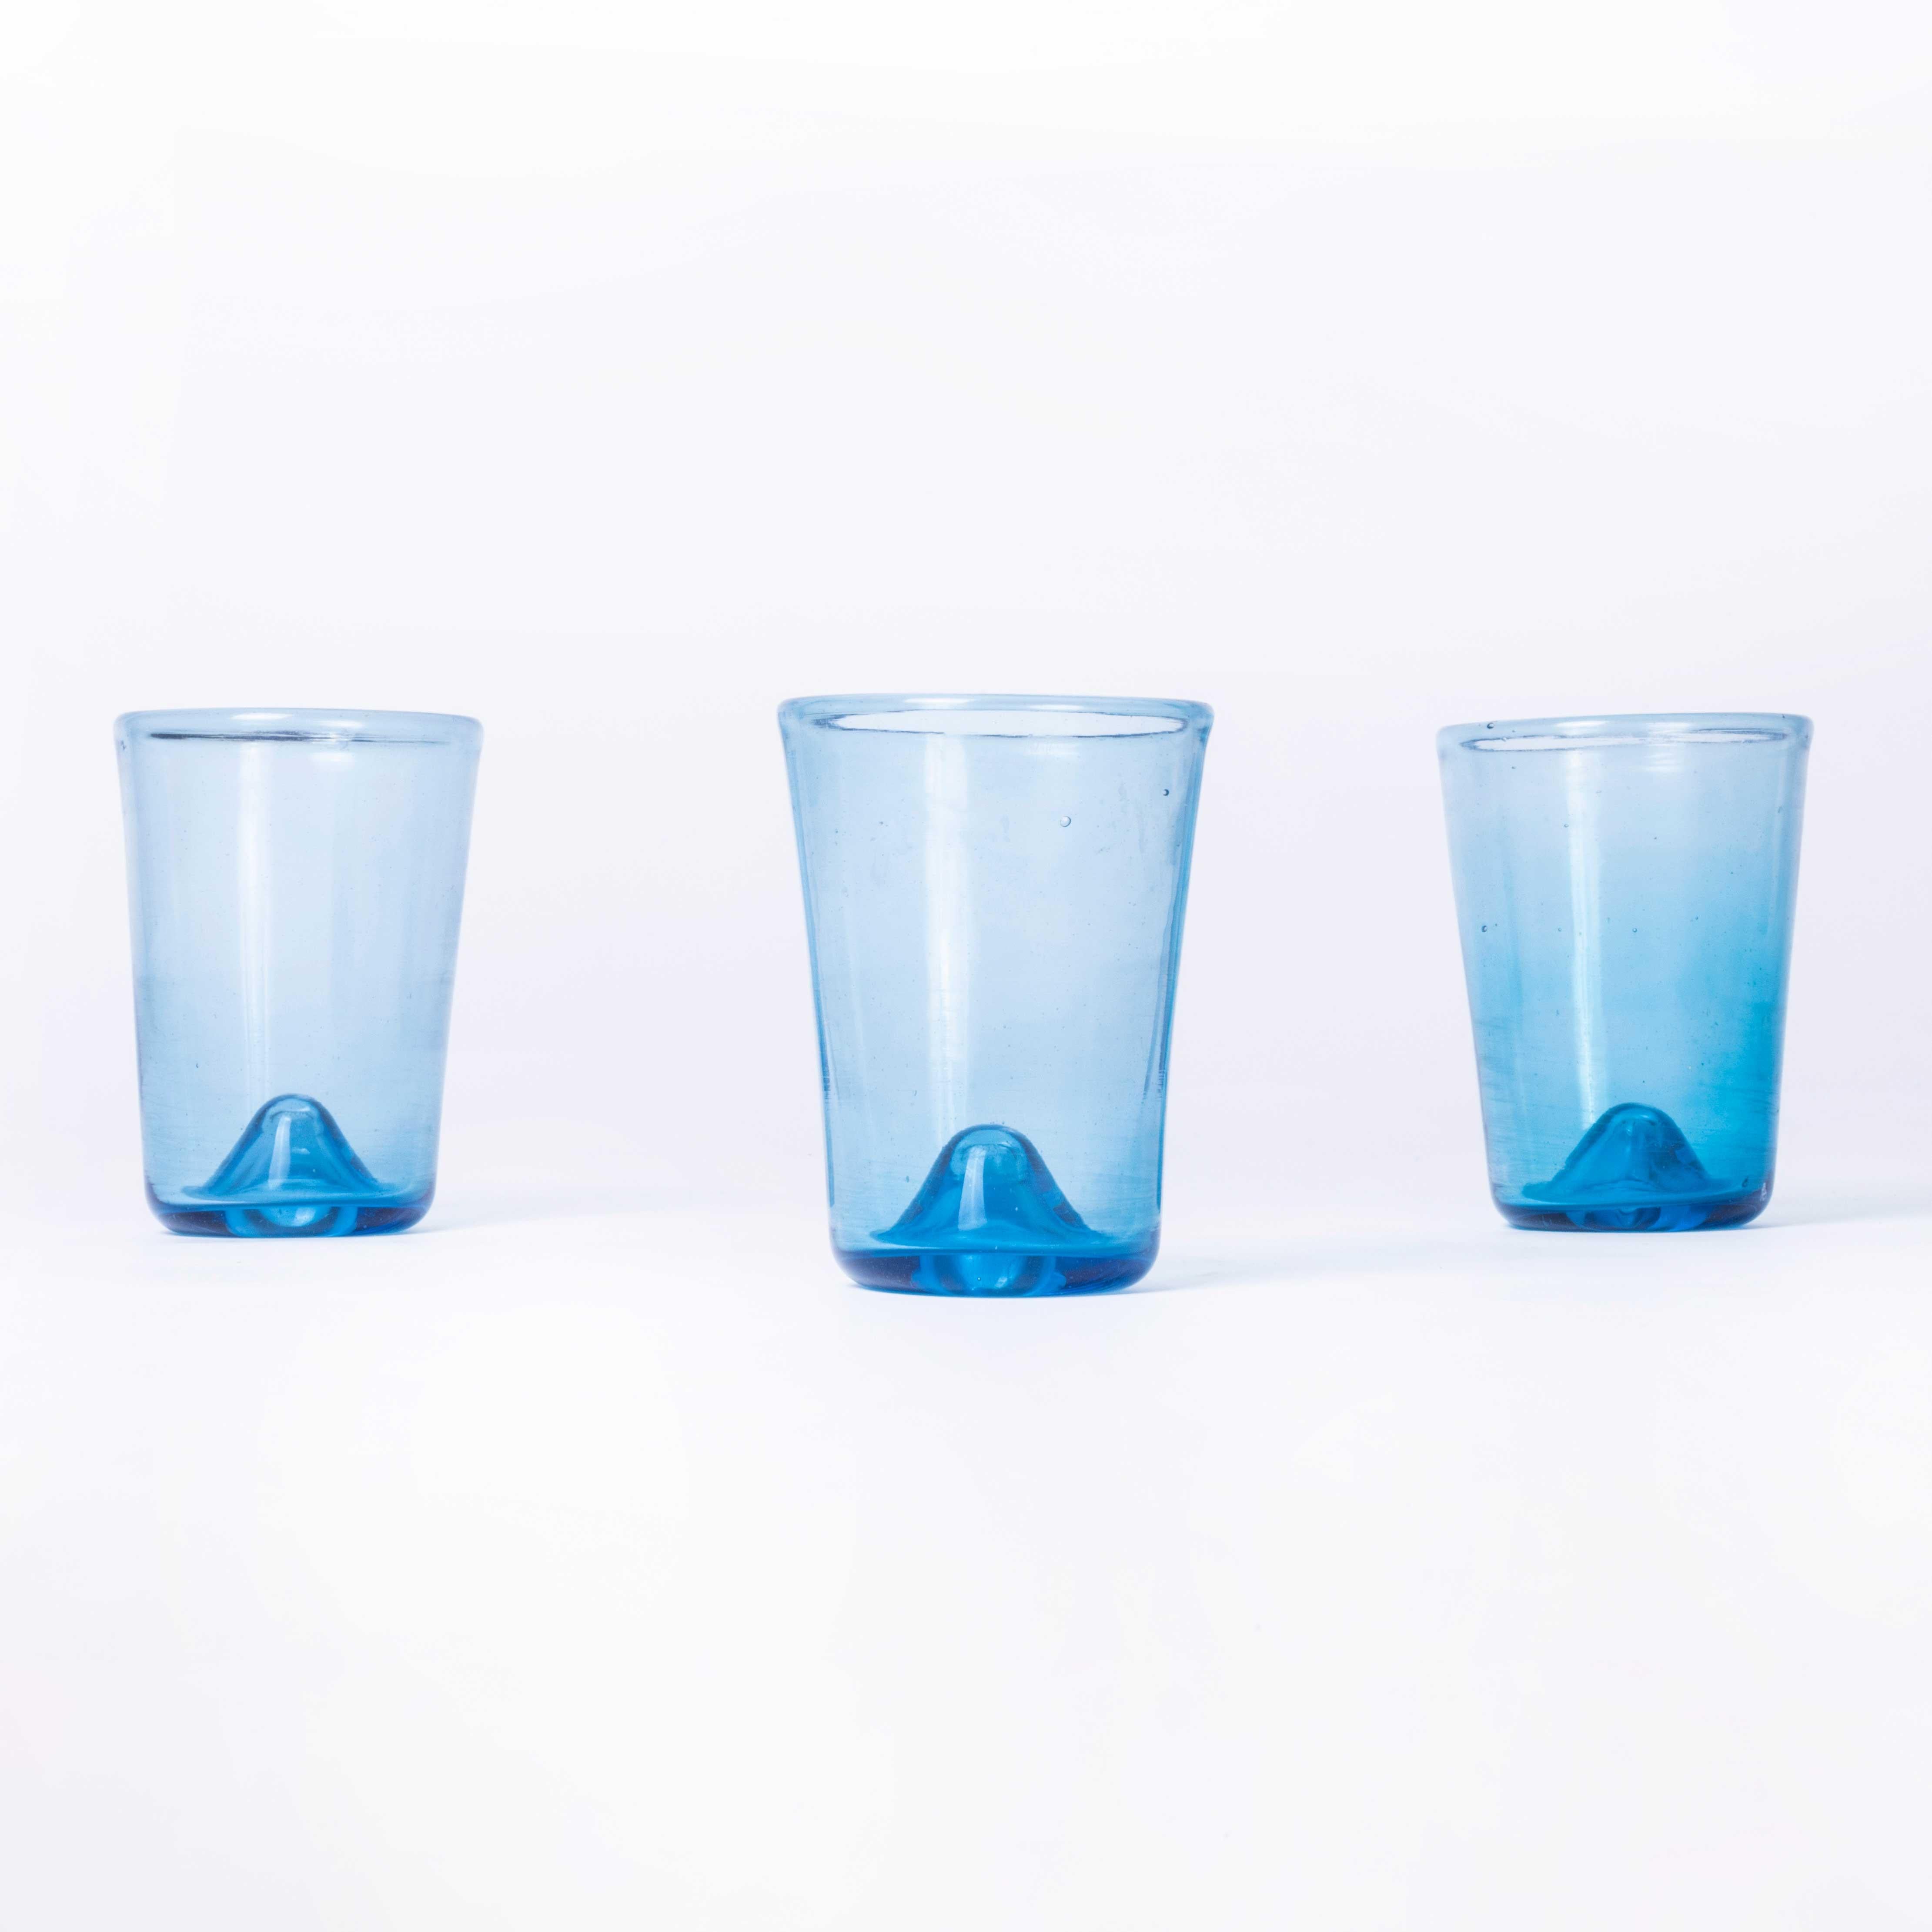 Moroccan Fine Tumblers – Blue
Moroccan Fine Tumblers – Blue. Hand-made in Morocco. The glass is mouth blown and available in a beautiful soft blue. The glass is mouth blown in a wonderful artisan quality. Because of the artisan production the